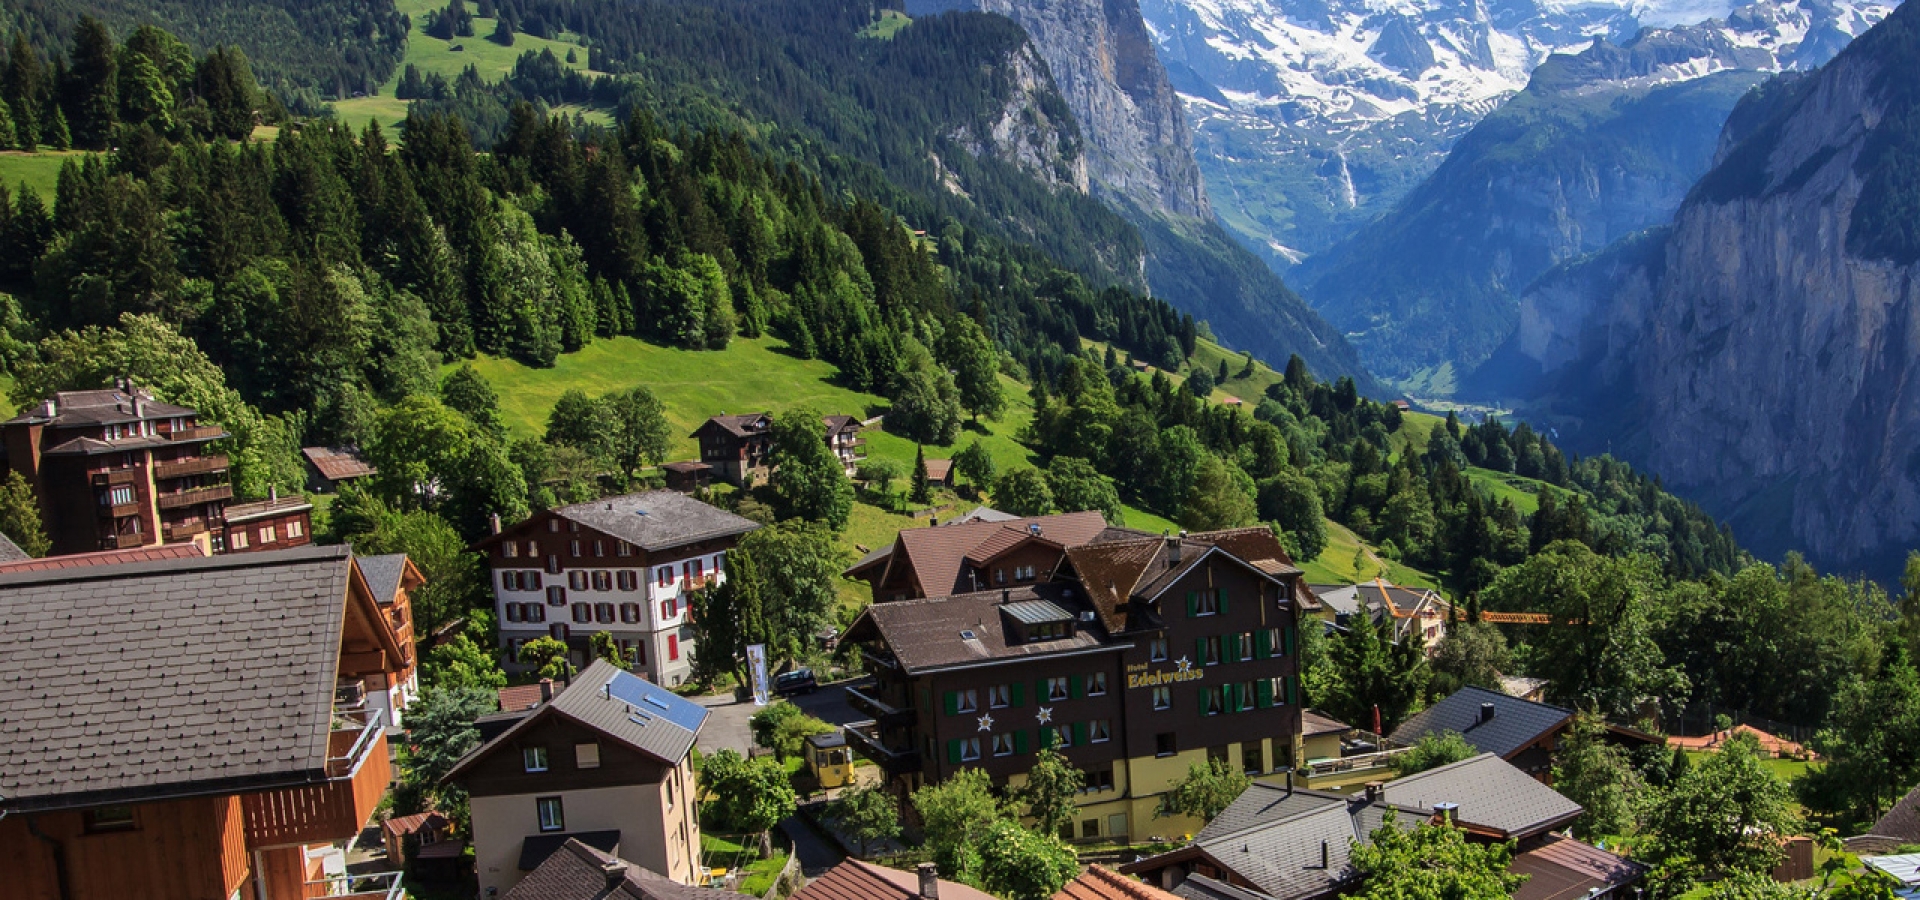 Swiss Alps Vacations, Tours & Travel Packages